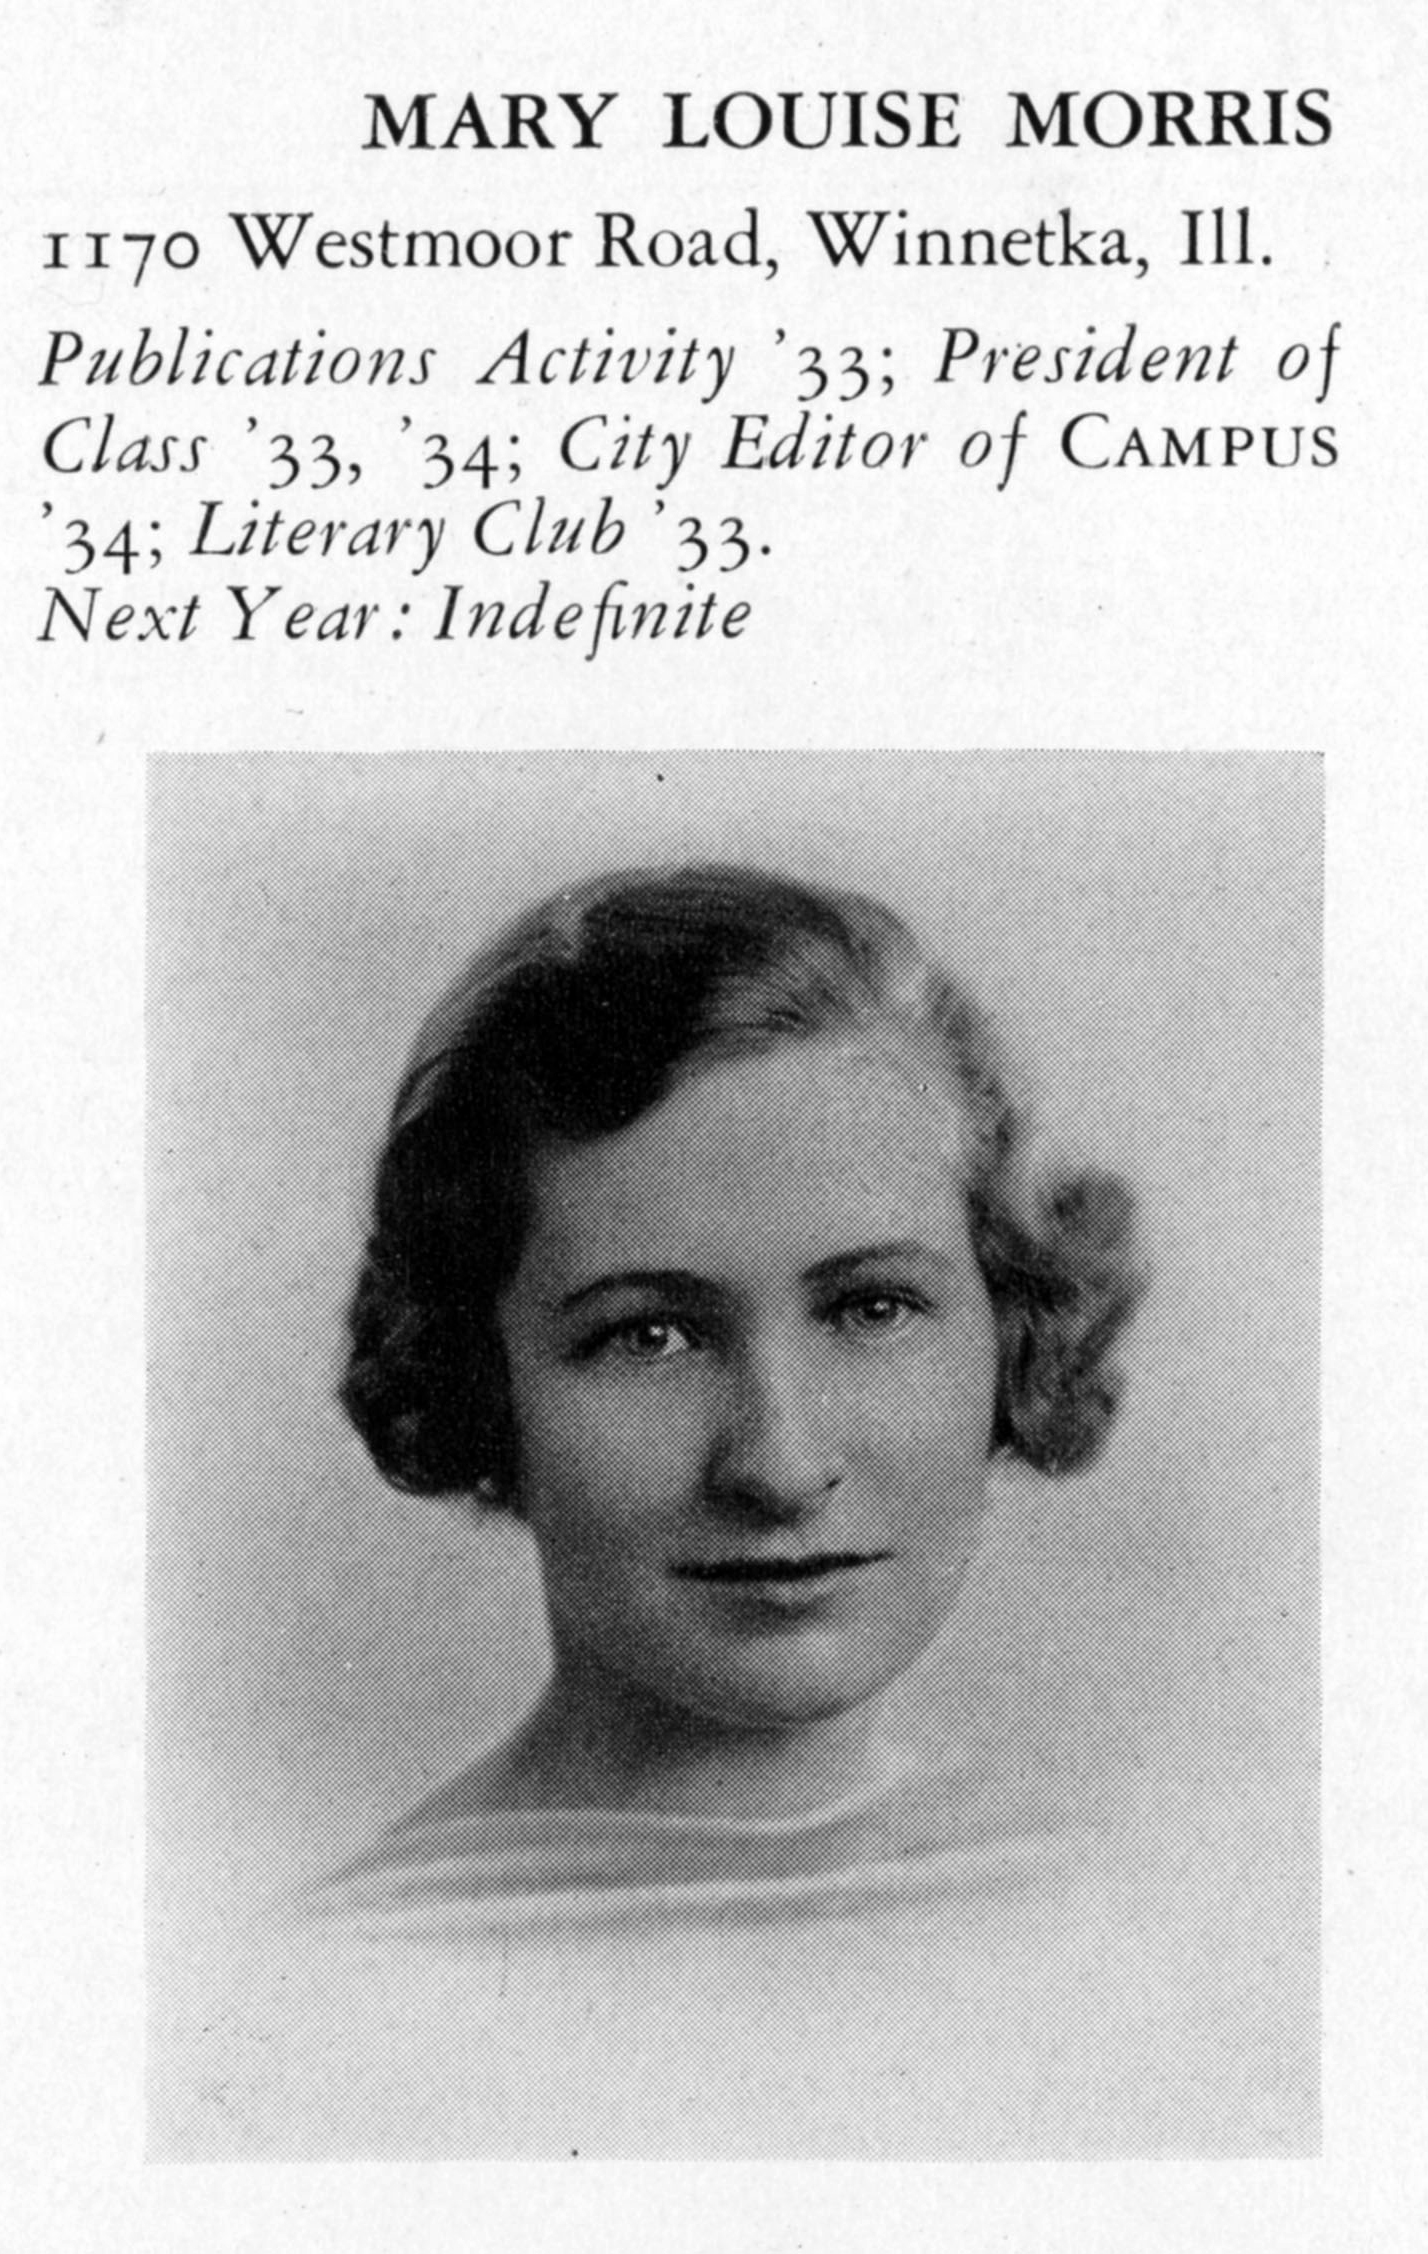  Mary Louise Morris 1934 Yearbook Photograph. Courtesy of the Sarah Lawrence College Archives.